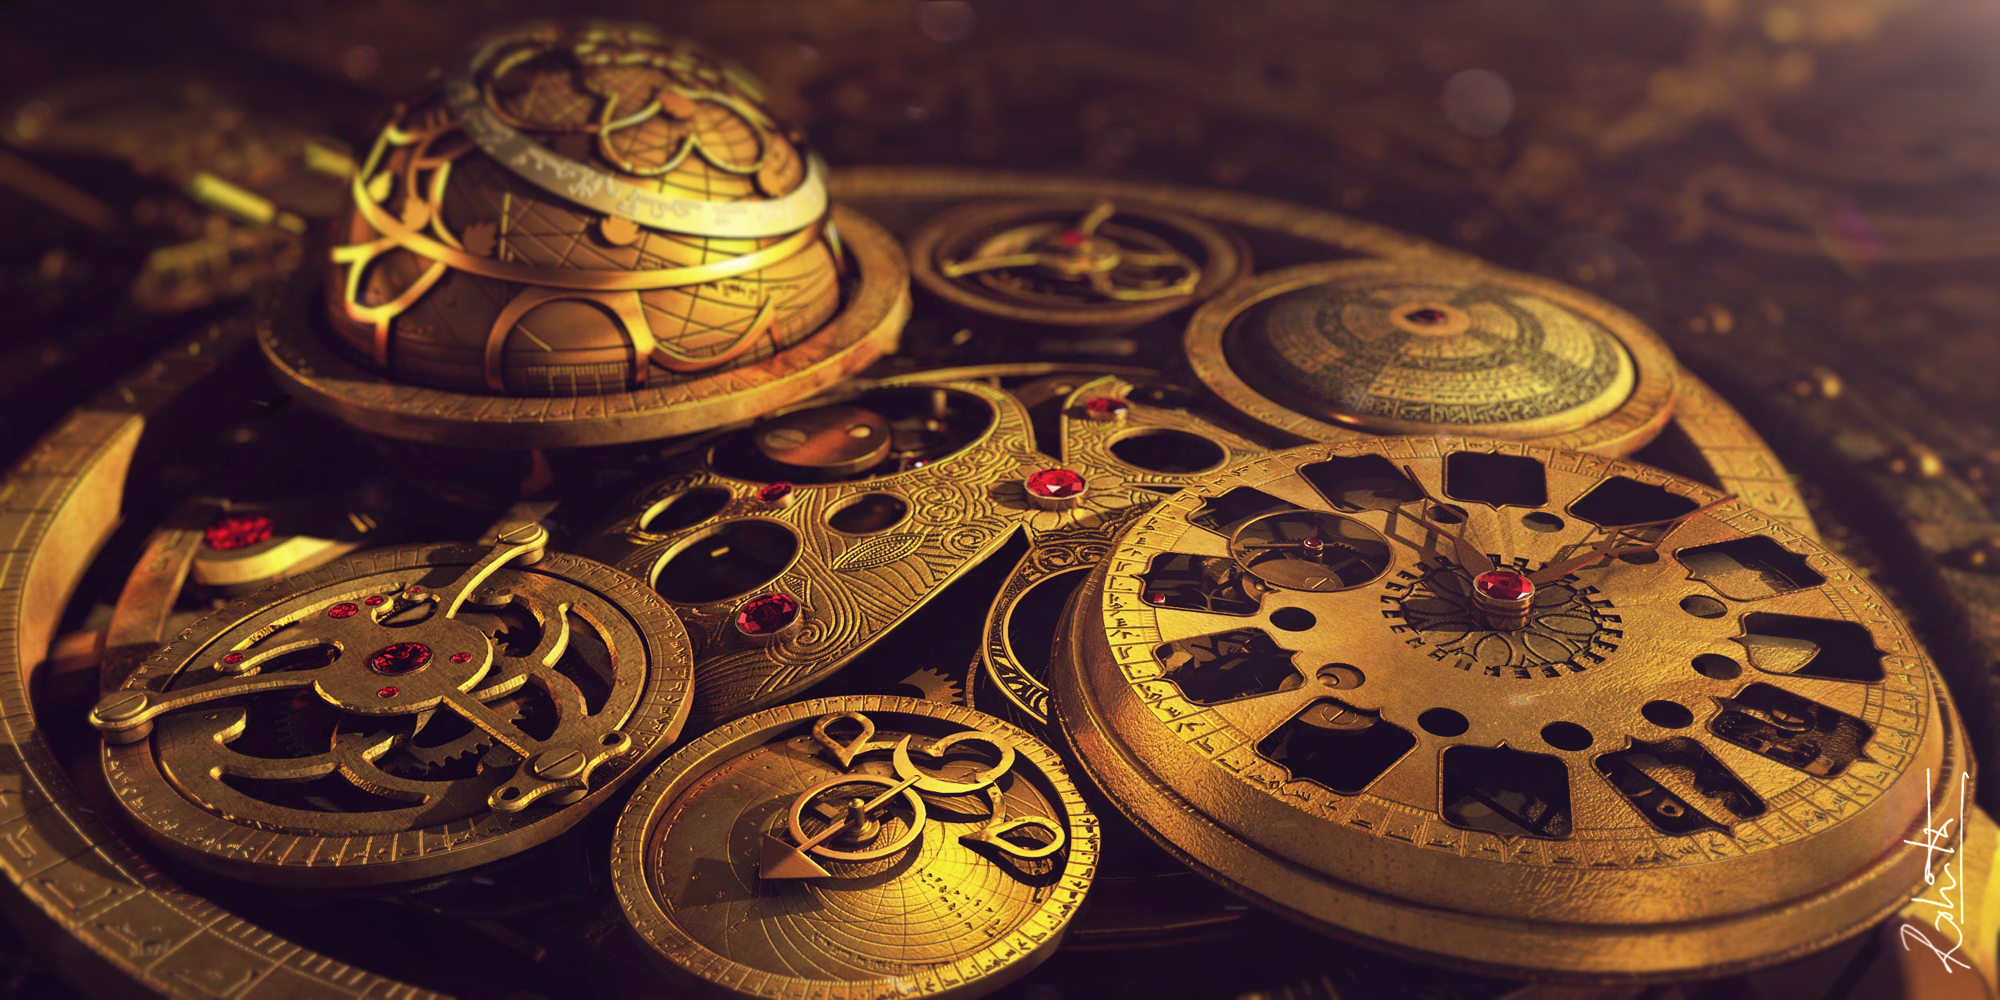 Old Clock by raorohith / Scenes - 3dtotal.com